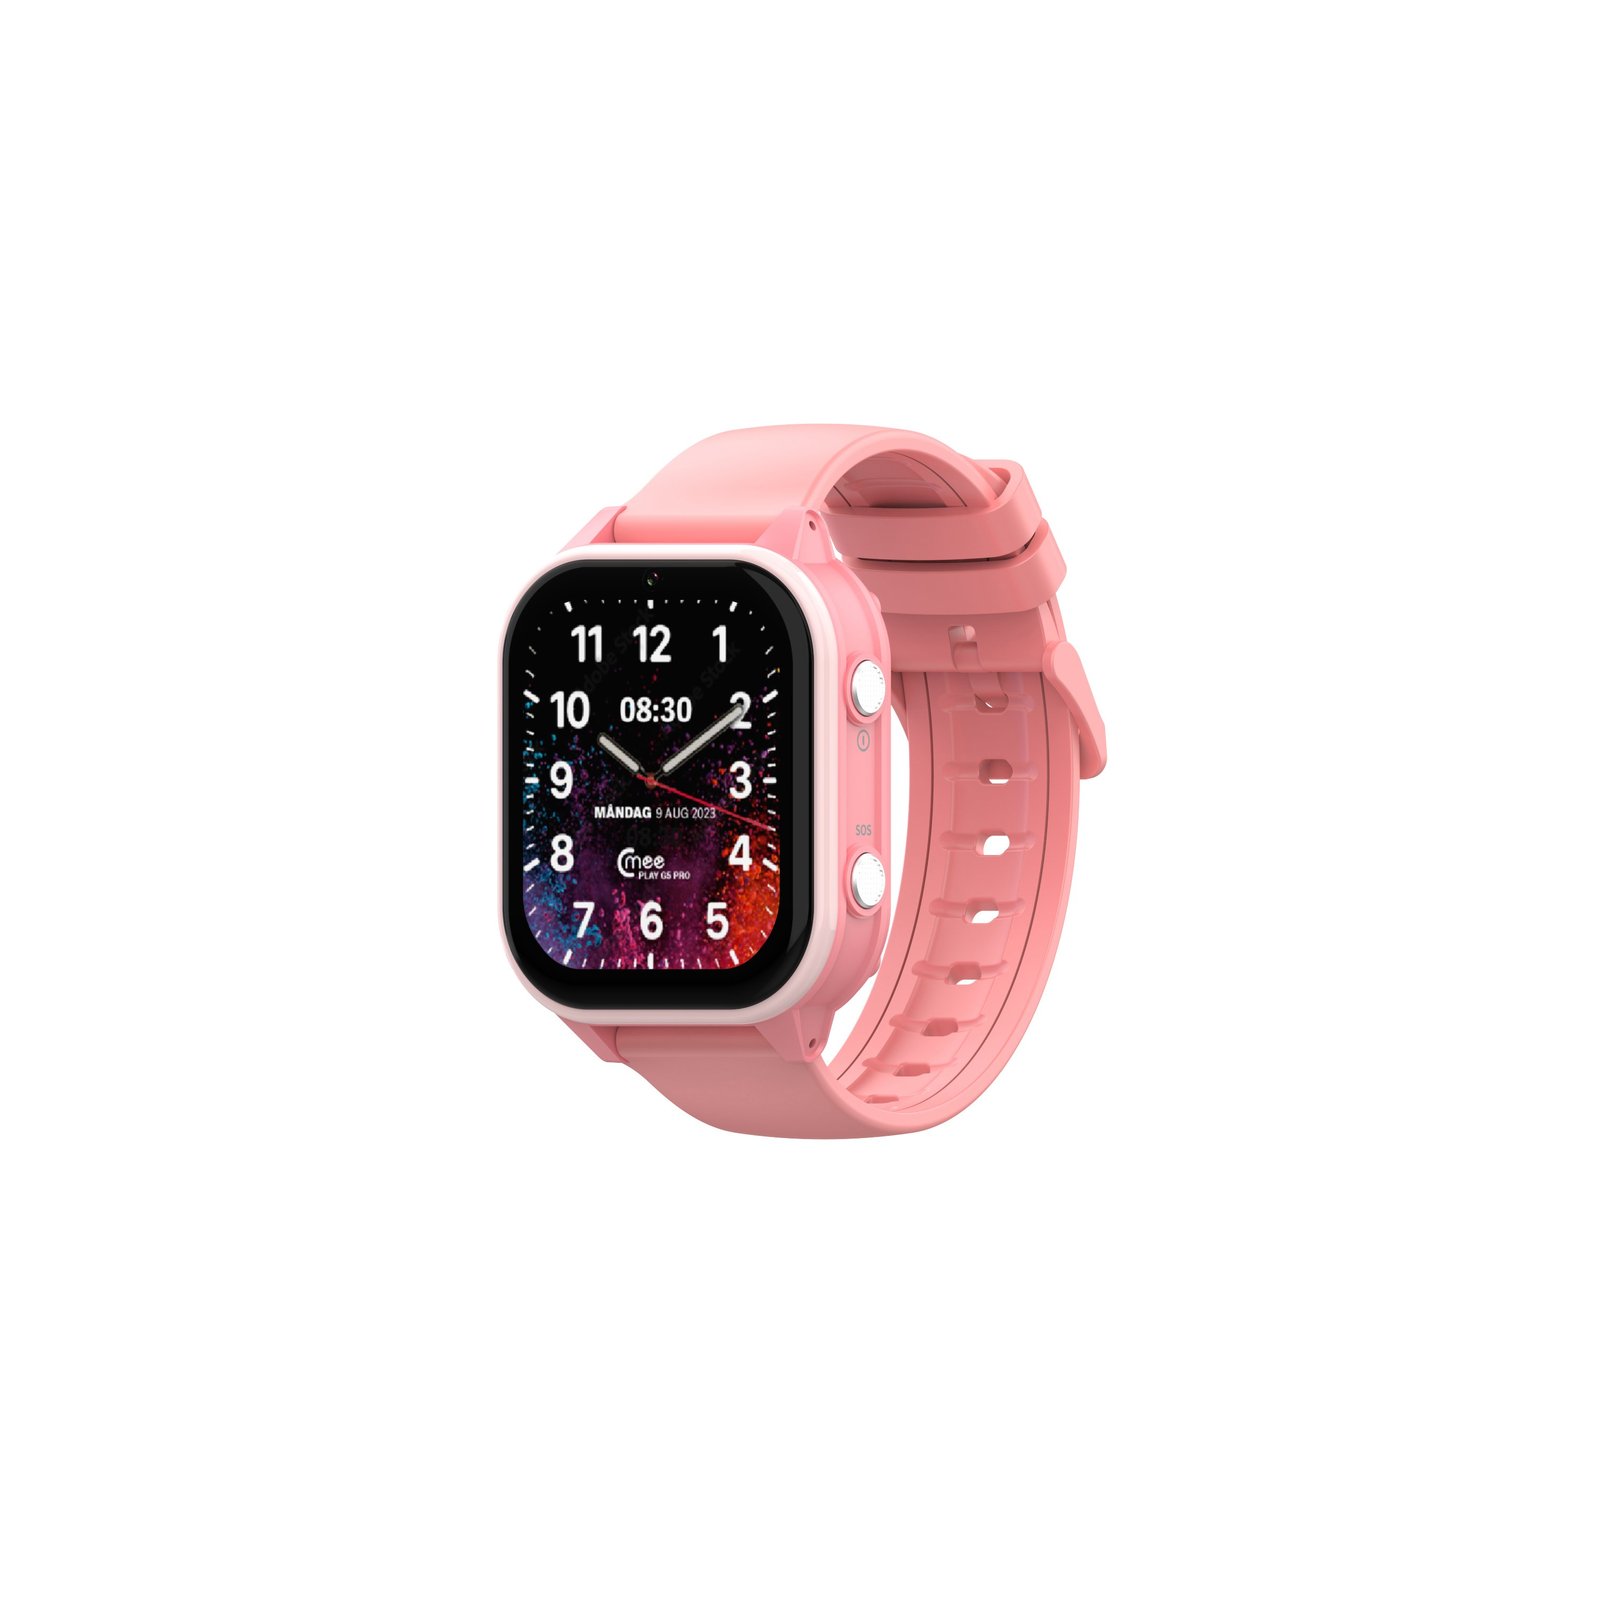 CMEE PLAY Mobile Watch G5 Pro Pink